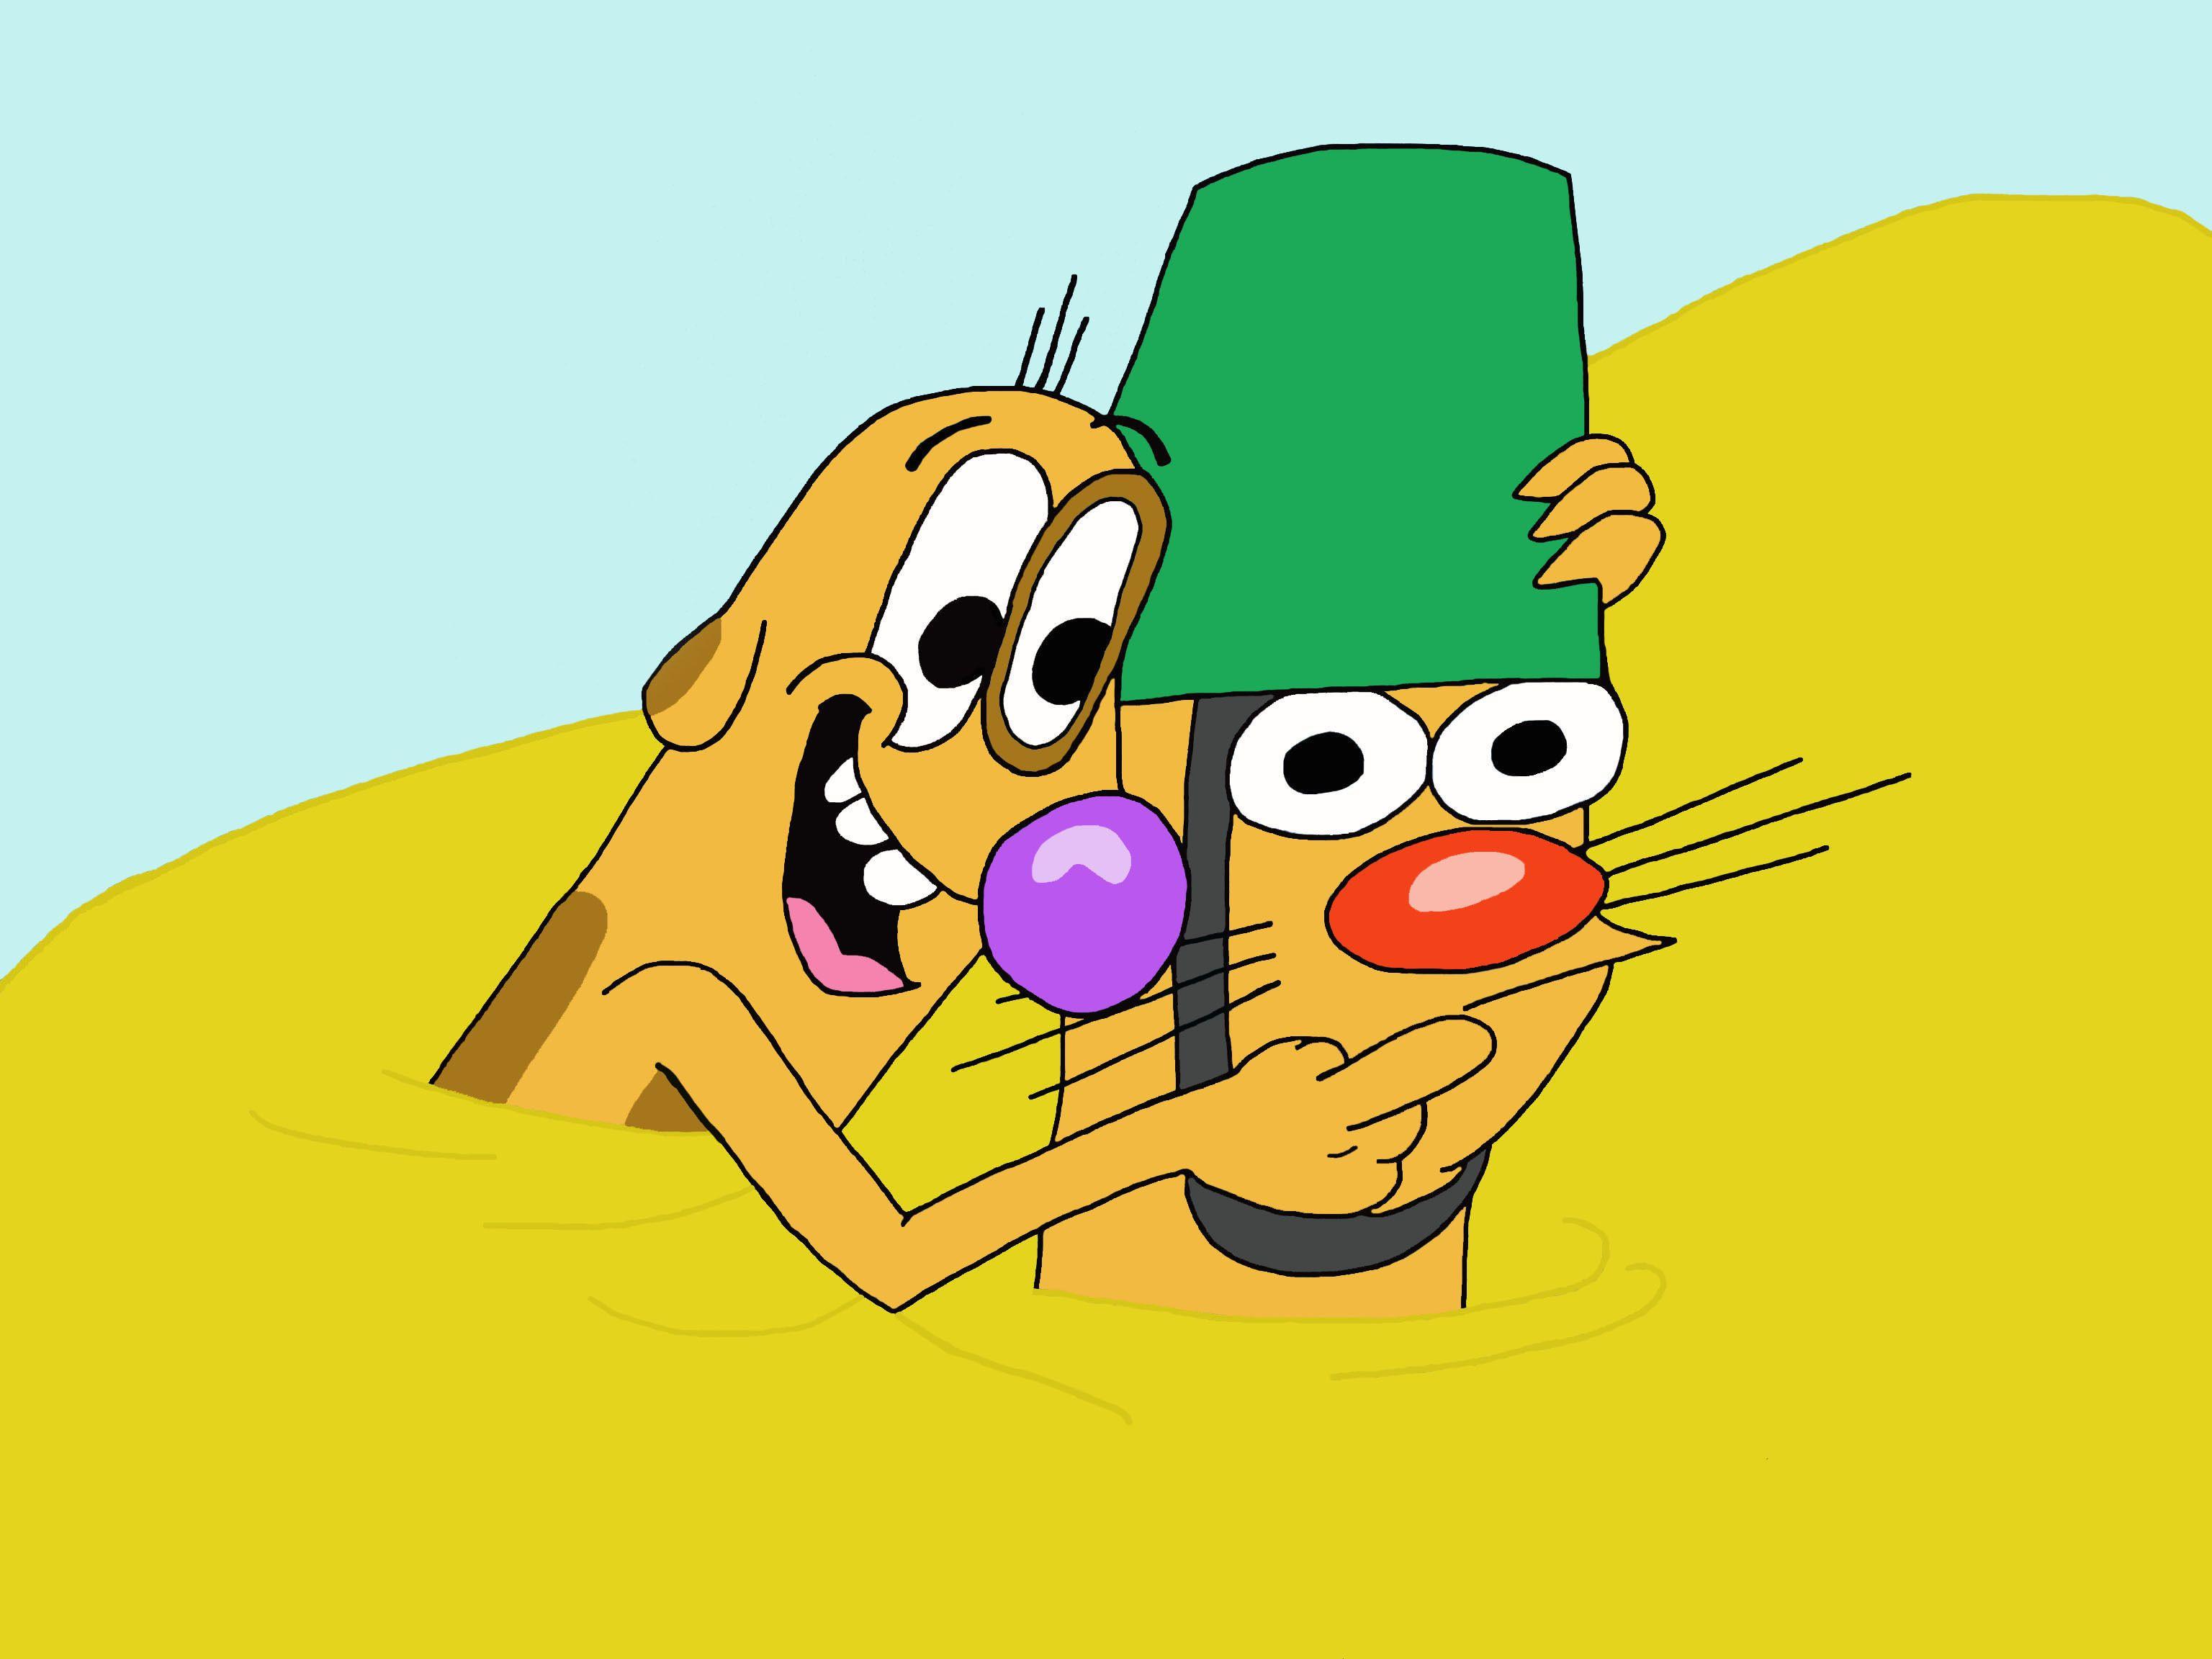 CatDog wallpaper and image, picture, photo